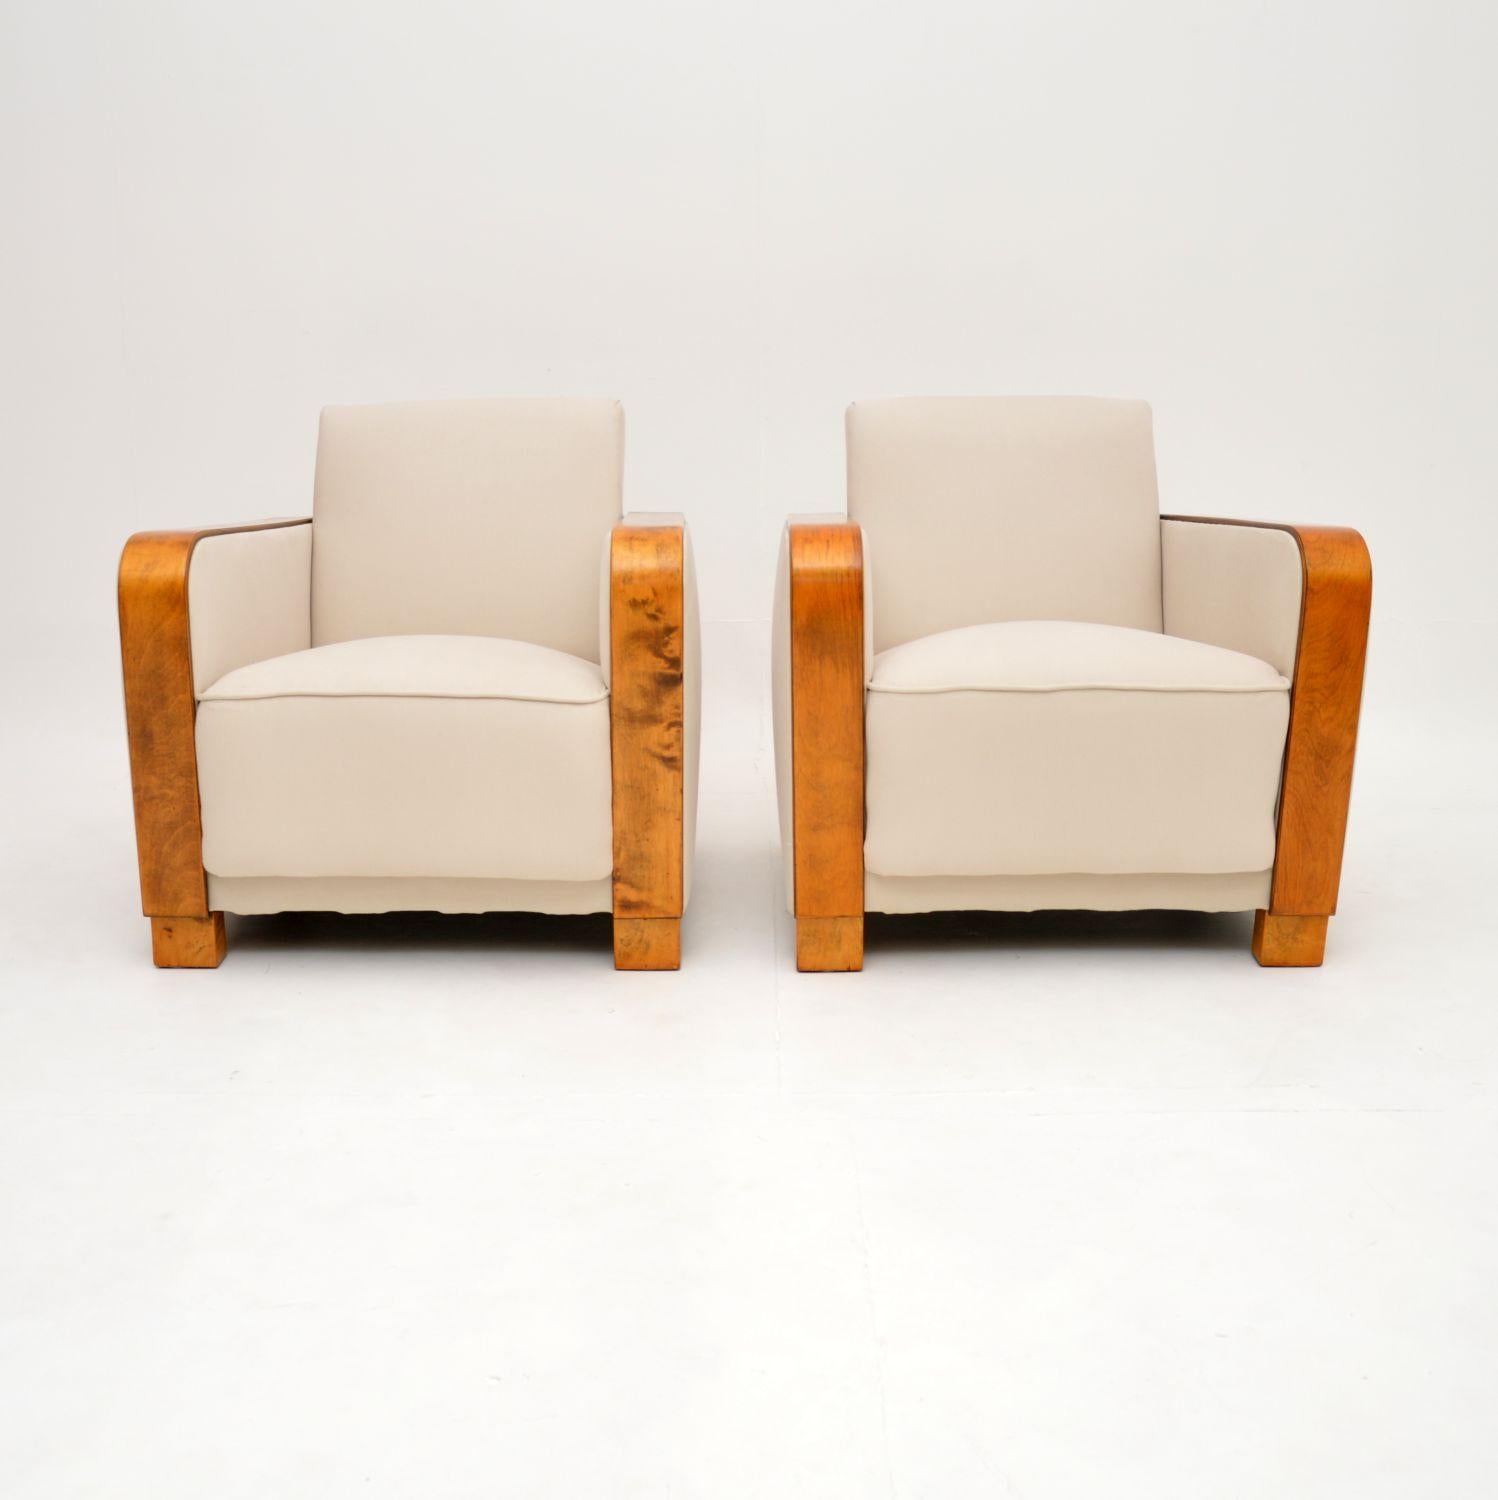 A very stylish and extremely well made pair of original Art Deco Satin Birch armchairs. They were made in Sweden, they date from the 1920-30’s.

They have a very bold and beautiful design and are of superb quality. The satin birch arms run down the